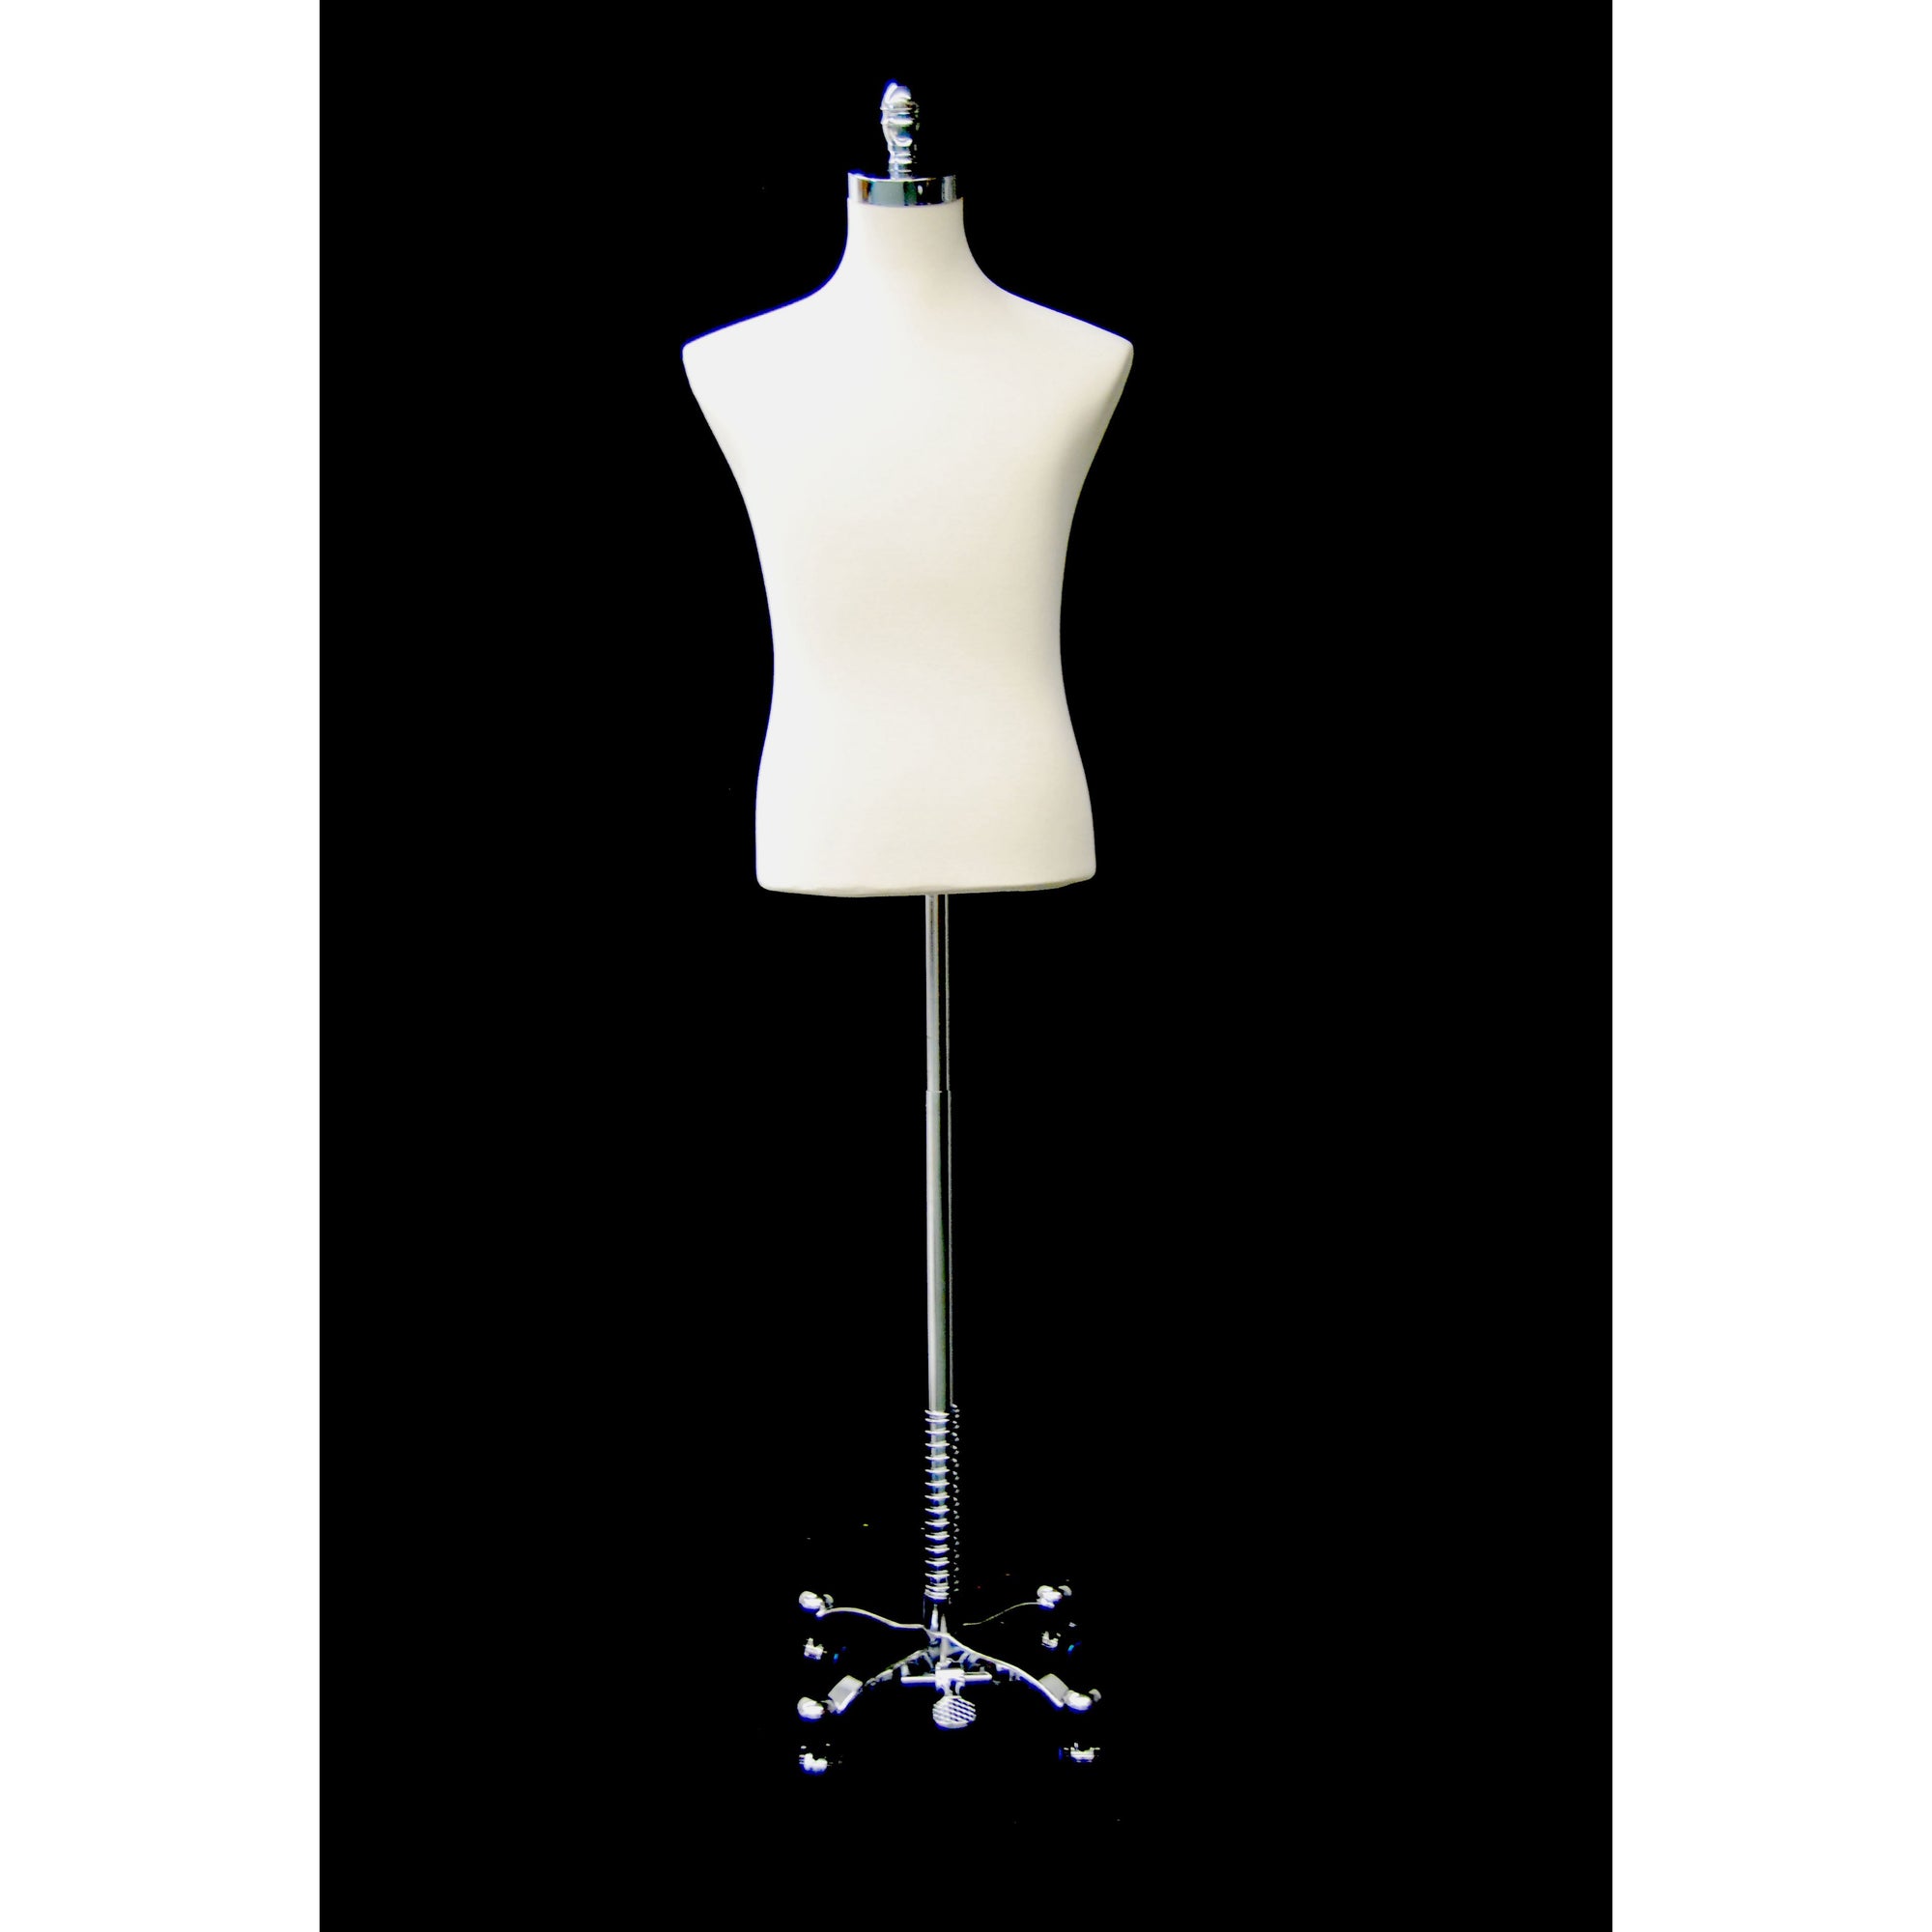 Male Display Dress Form on Chrome Rolling Base, male display form, off white male display form on chrome rolling base, off white male shirt form on chrome rolling base